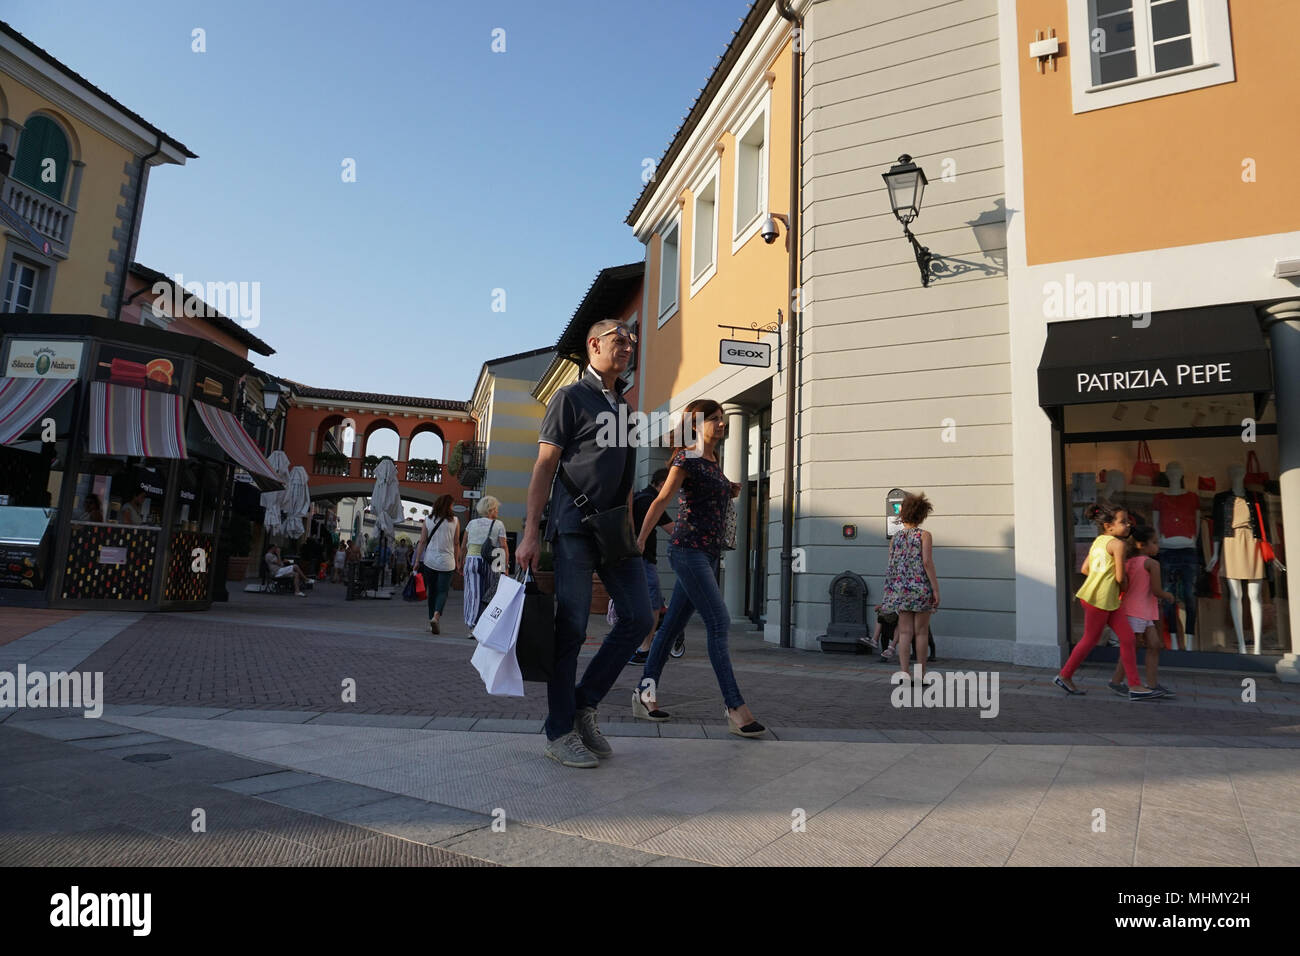 geox serravalle outlet